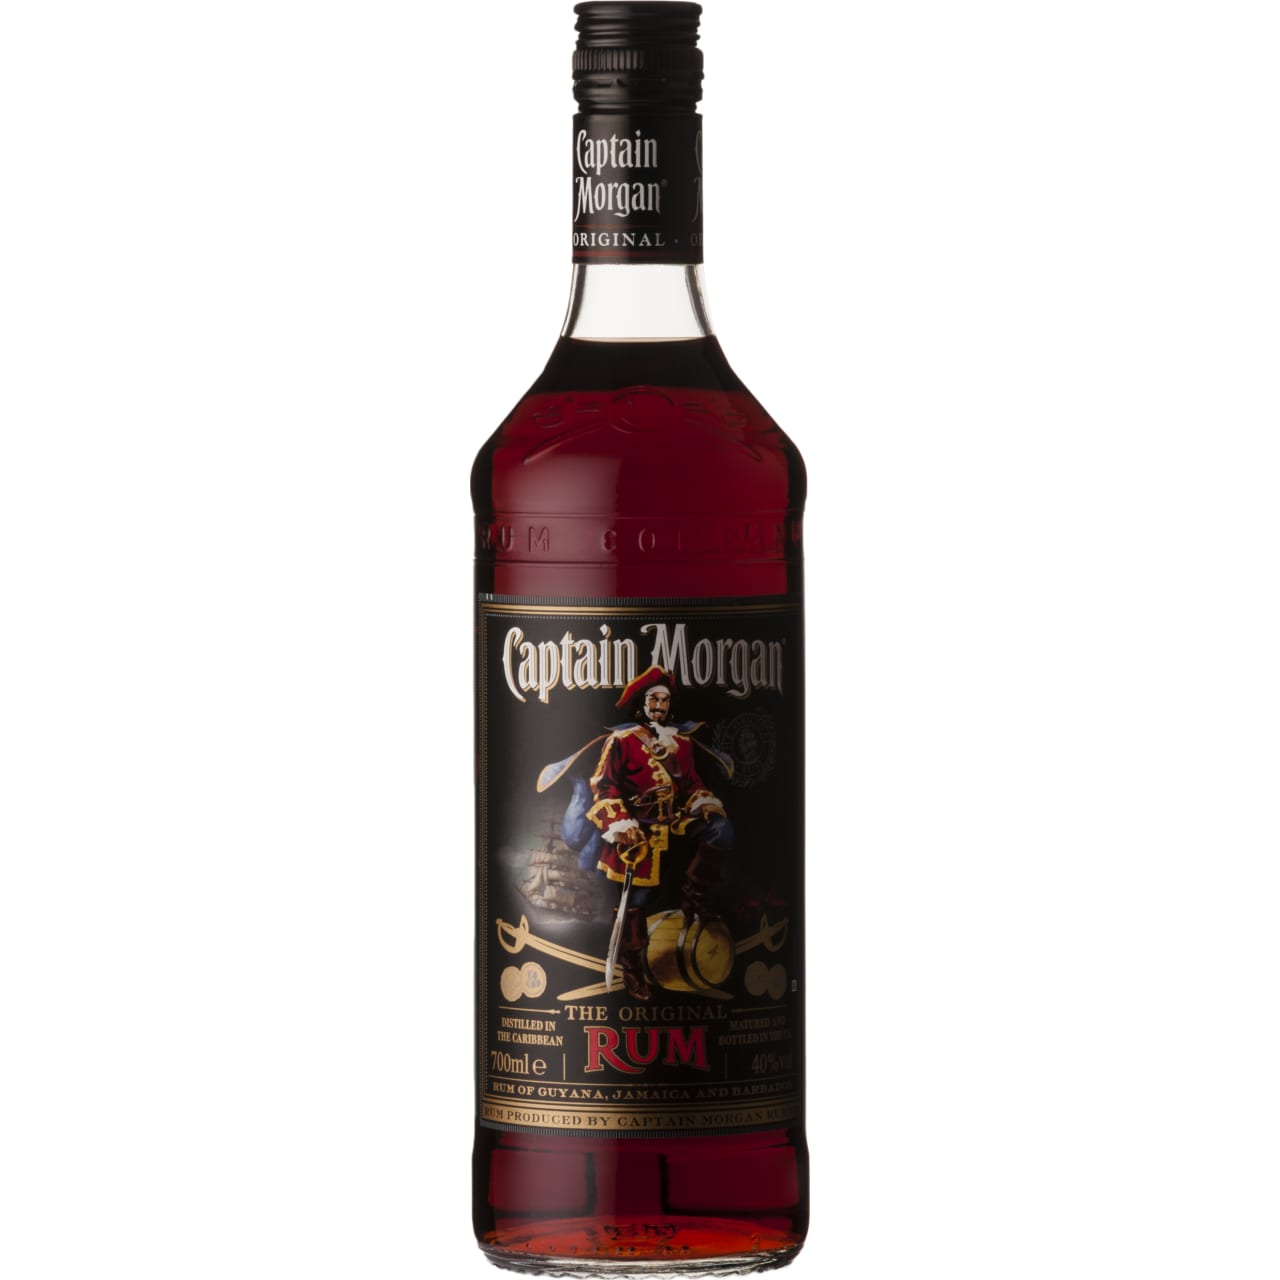 Captain Morgan Dark Rum is a rum with the heritage of Jamaica at its heart. It is rich, sumptuous and smooth.